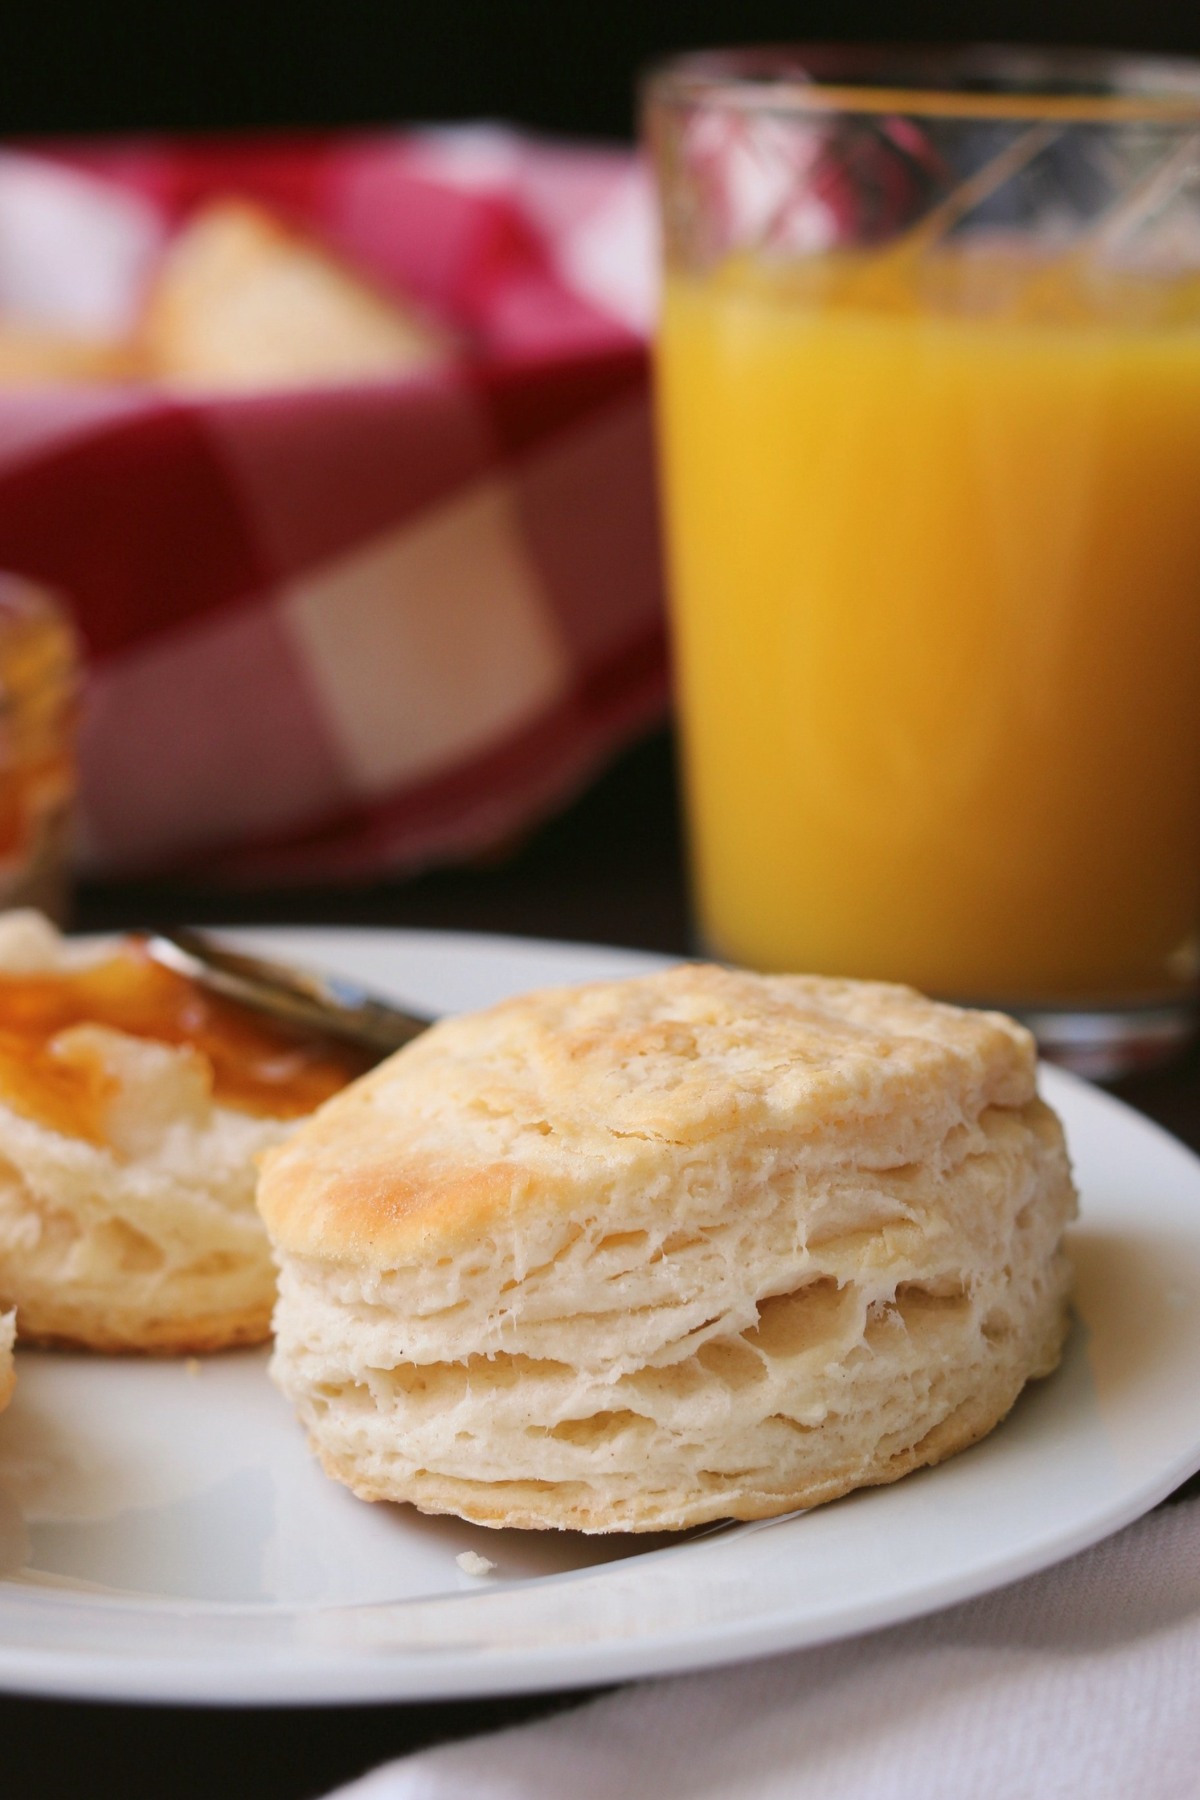 self-rising flour biscuit on plate with orange juice glass in background.